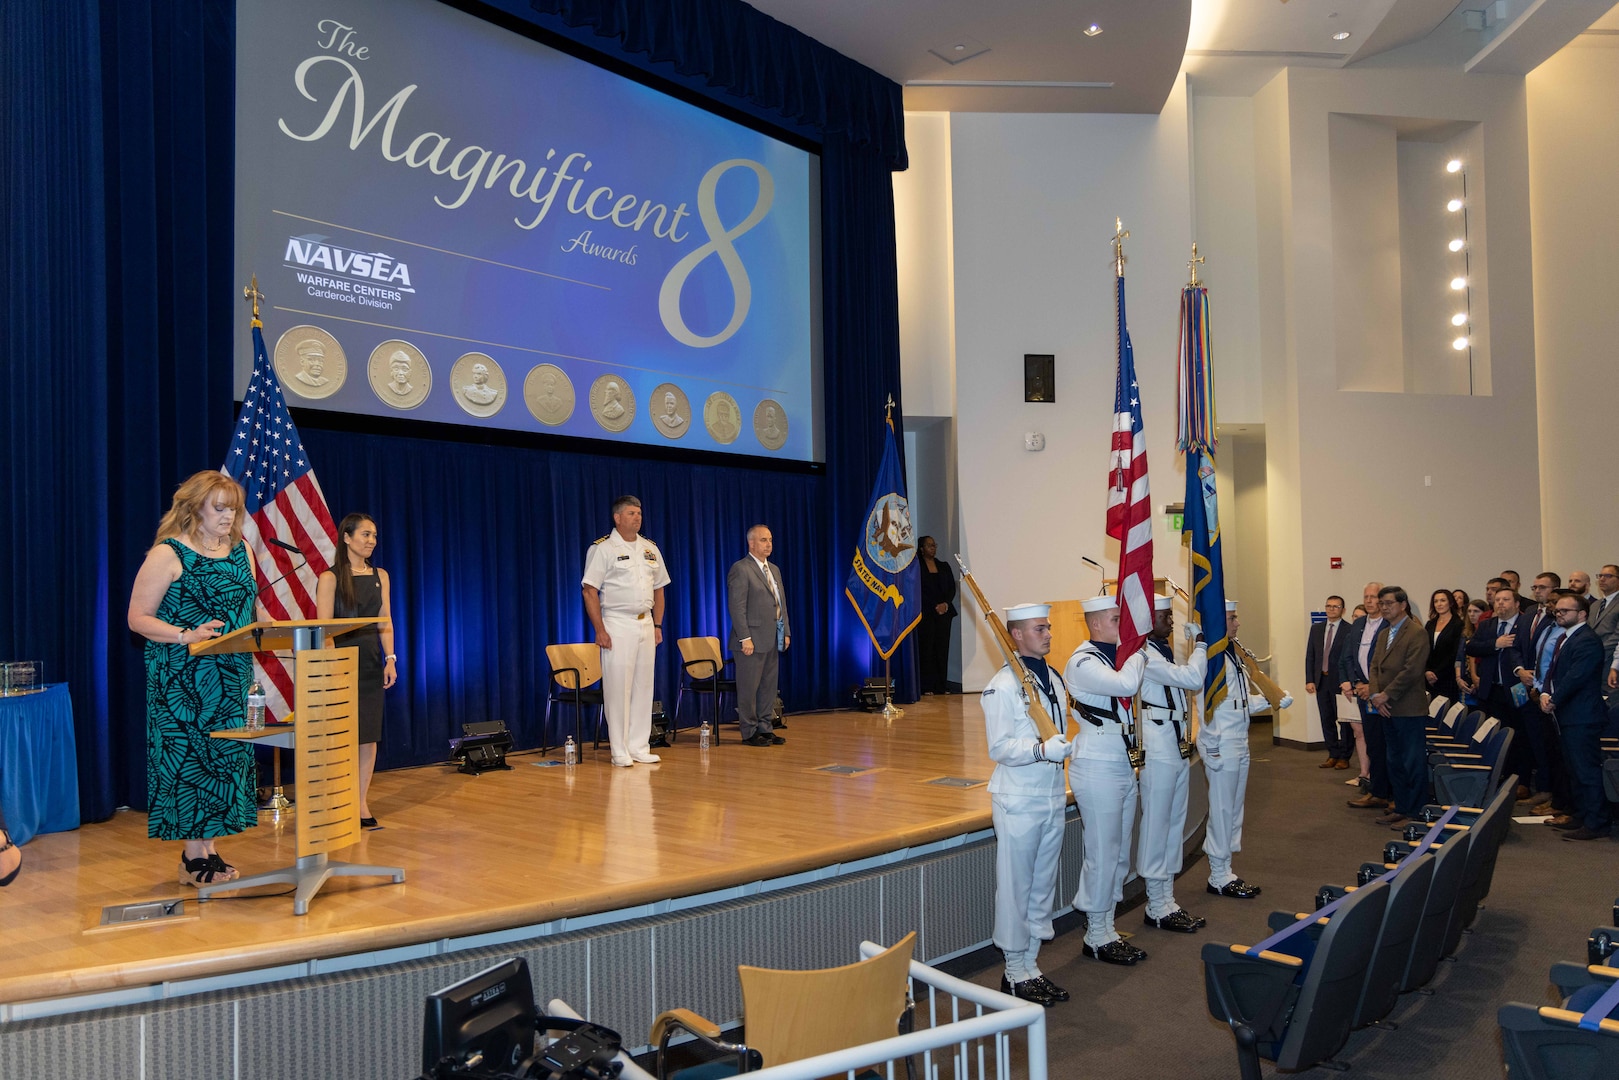 Naval Surface Warfare Center, Carderock Division administrative specialist Sue Rossi (left) introduces engineer Sharon Collins (second to left) to perform the National Anthem during the Magnificent Eight Award ceremony in West Bethesda, Md., on June 13. Carderock's Commanding Officer Capt. Matthew Tardy (third from left) and Technical Director Larry Tarasek (fourth from left) stand at attention as the Color Guard posts colors. (U.S. Navy photo by Aaron Thomas)